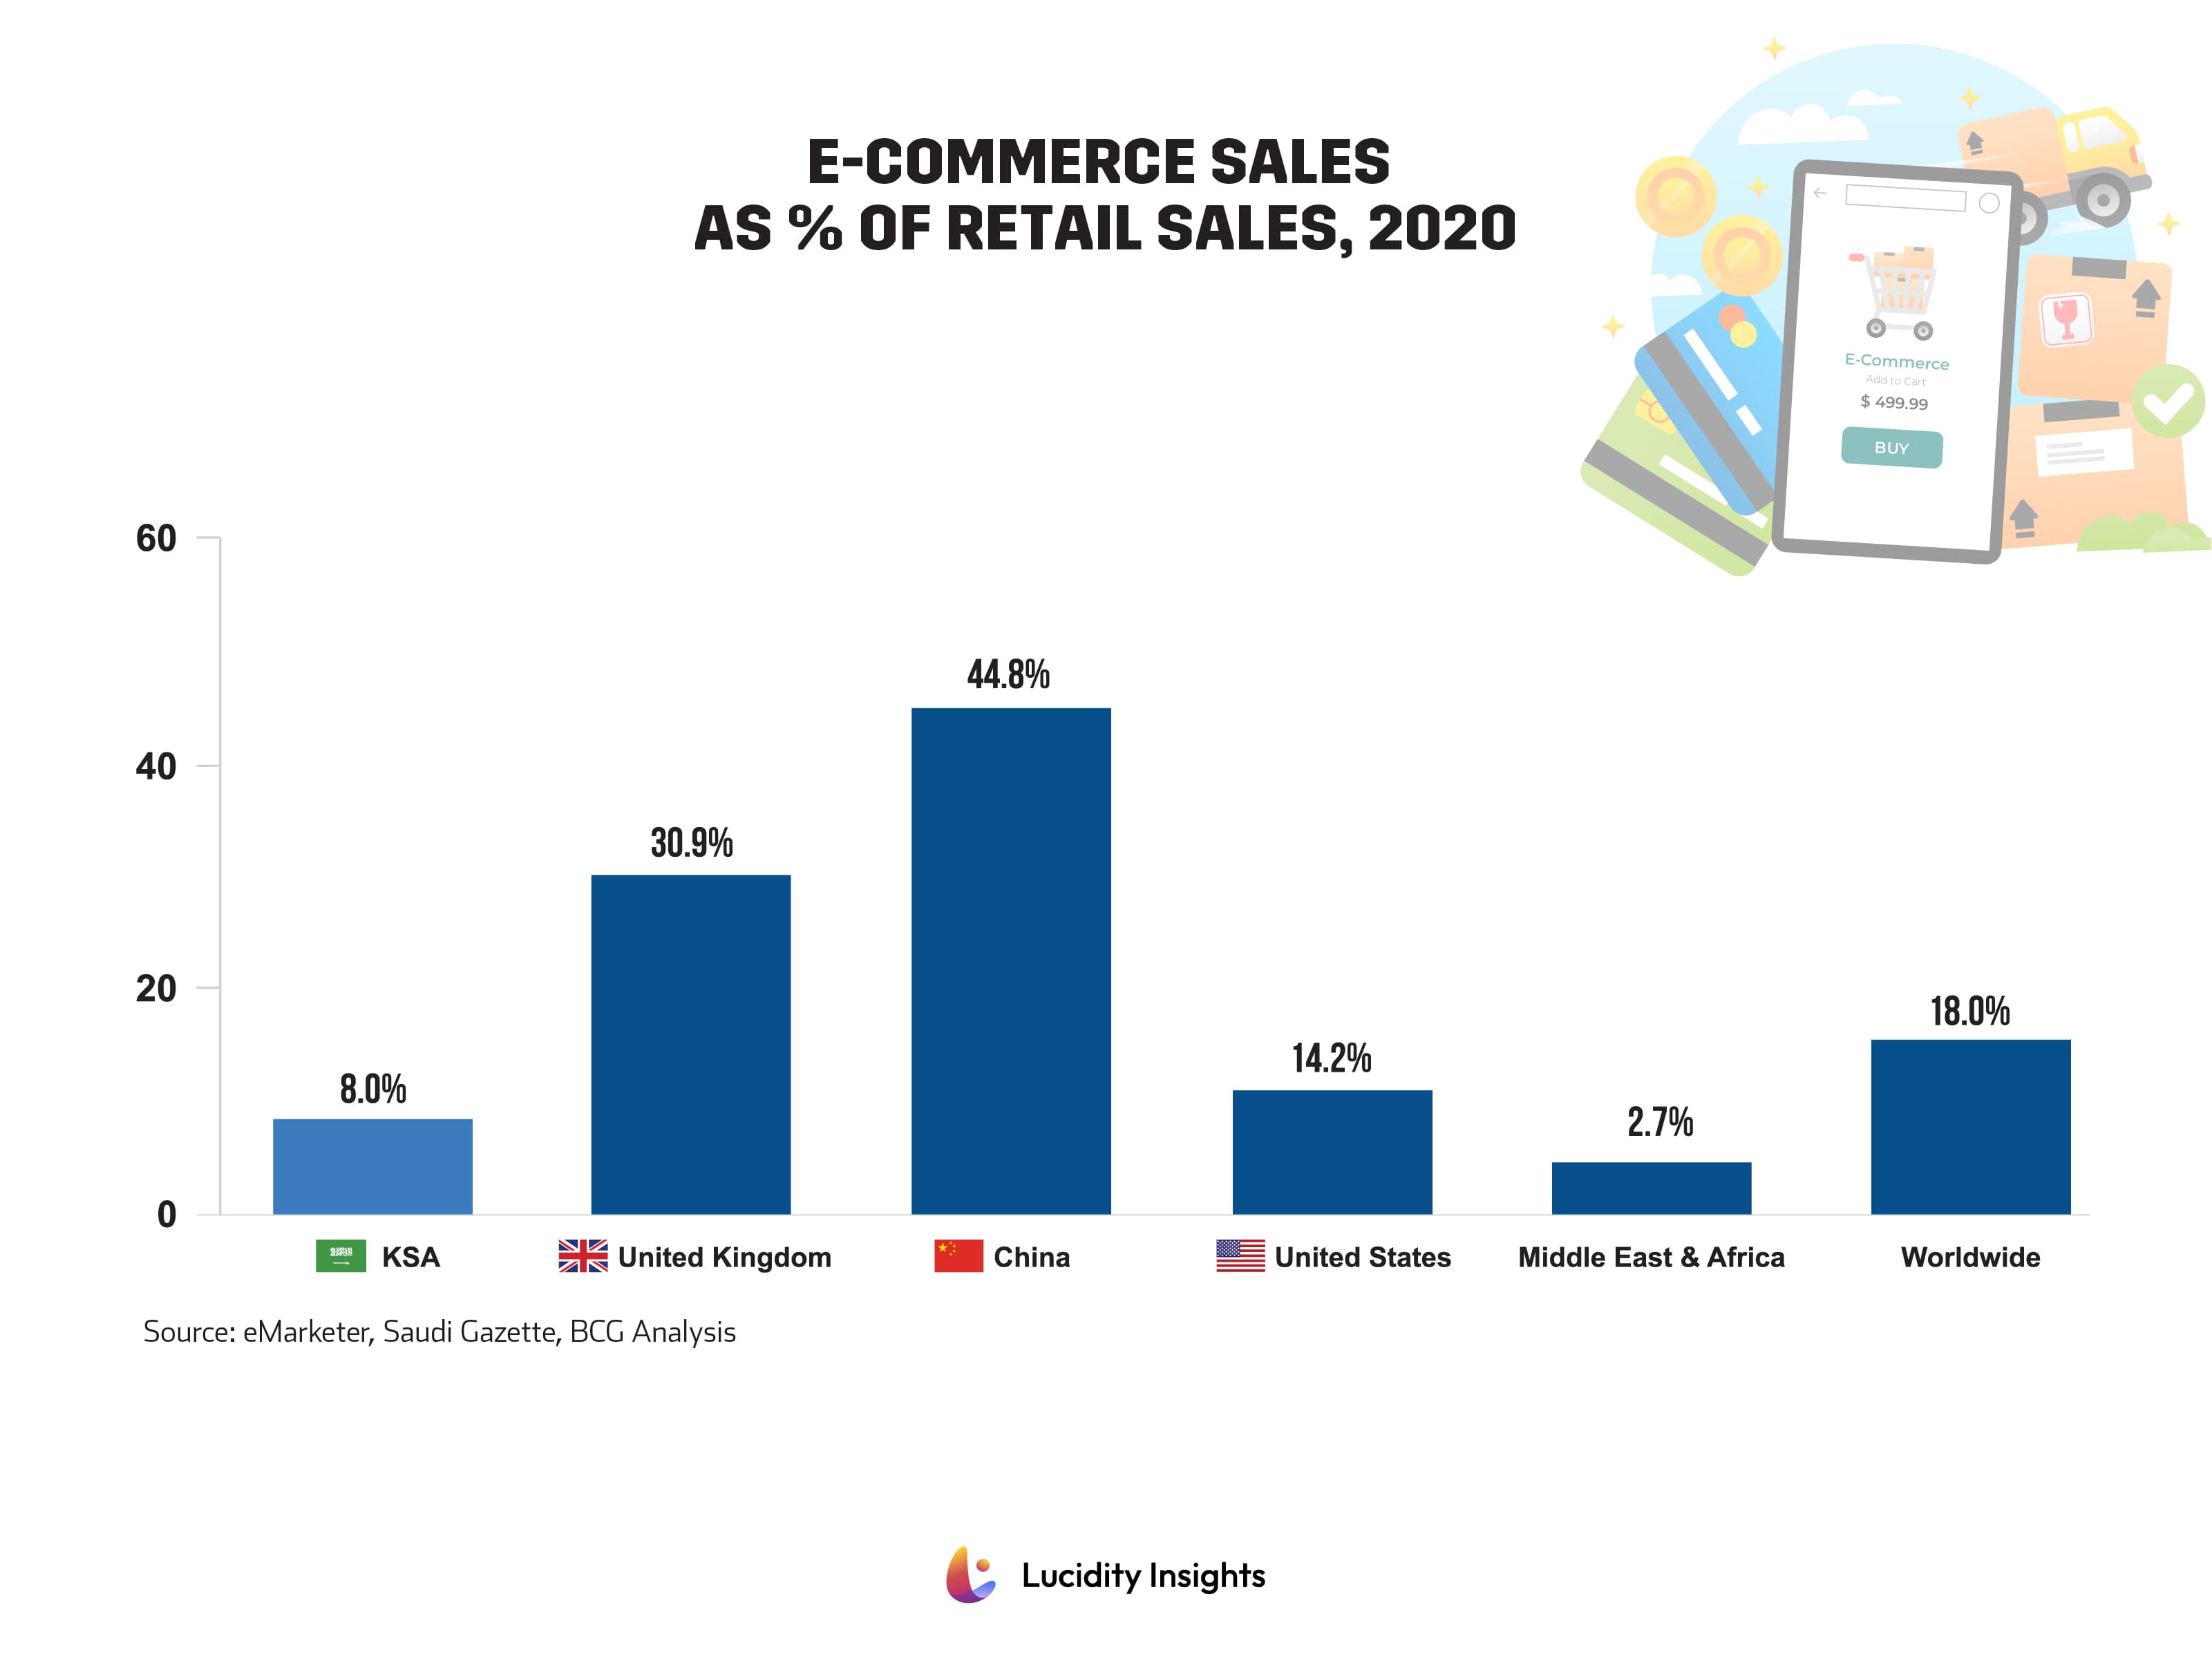 Saudi Arabia's E-commerce Sales as a Percentage of Retail Sales in 2020, in comparison to other Economies